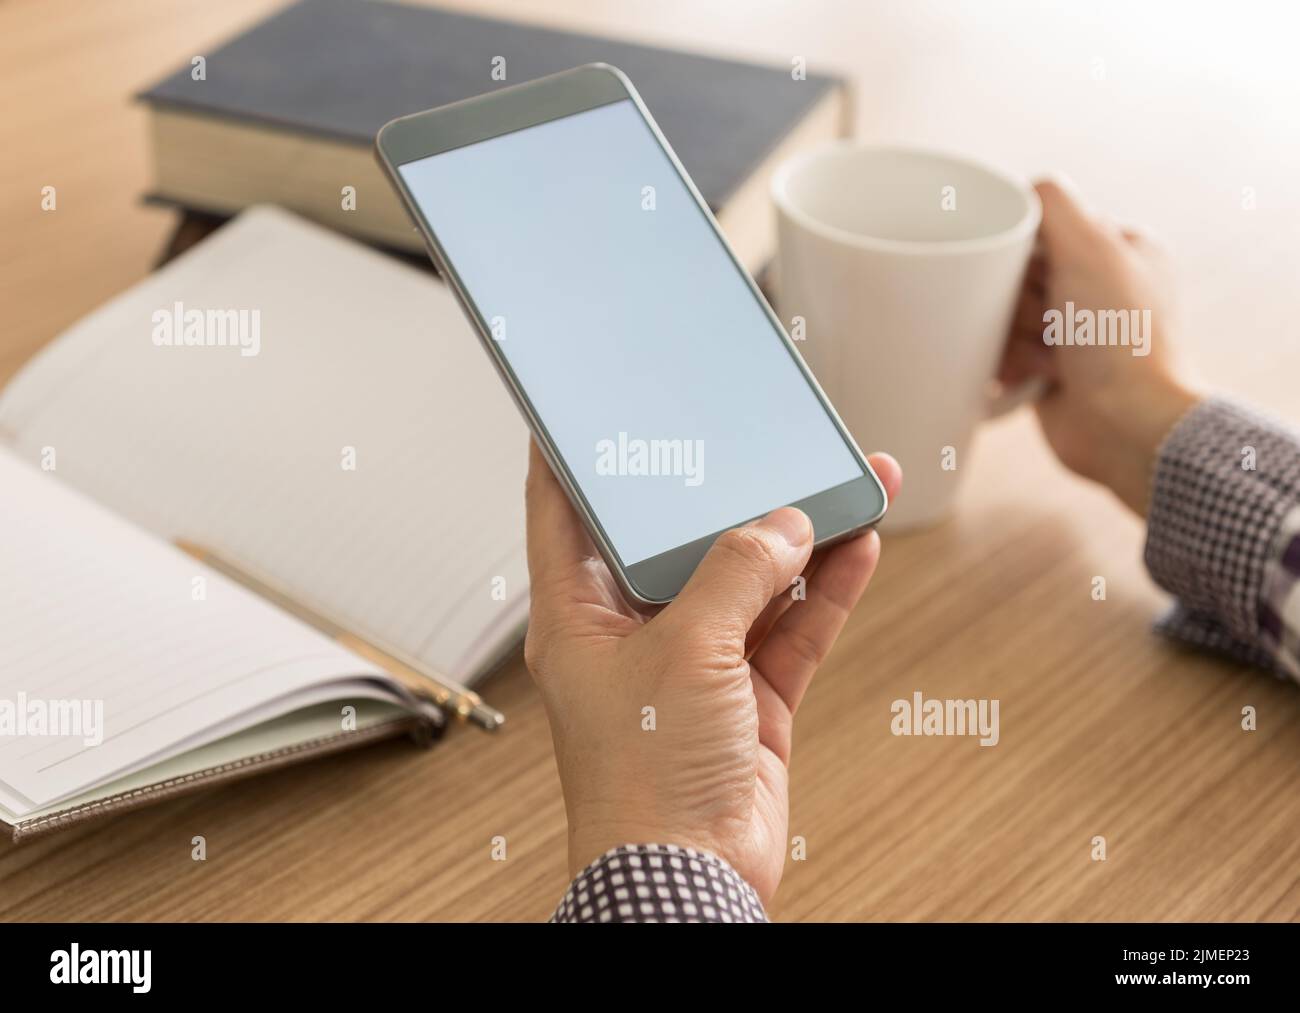 women using mobile phone in cafe. sofe focus. blank screen for your advertising. Stock Photo